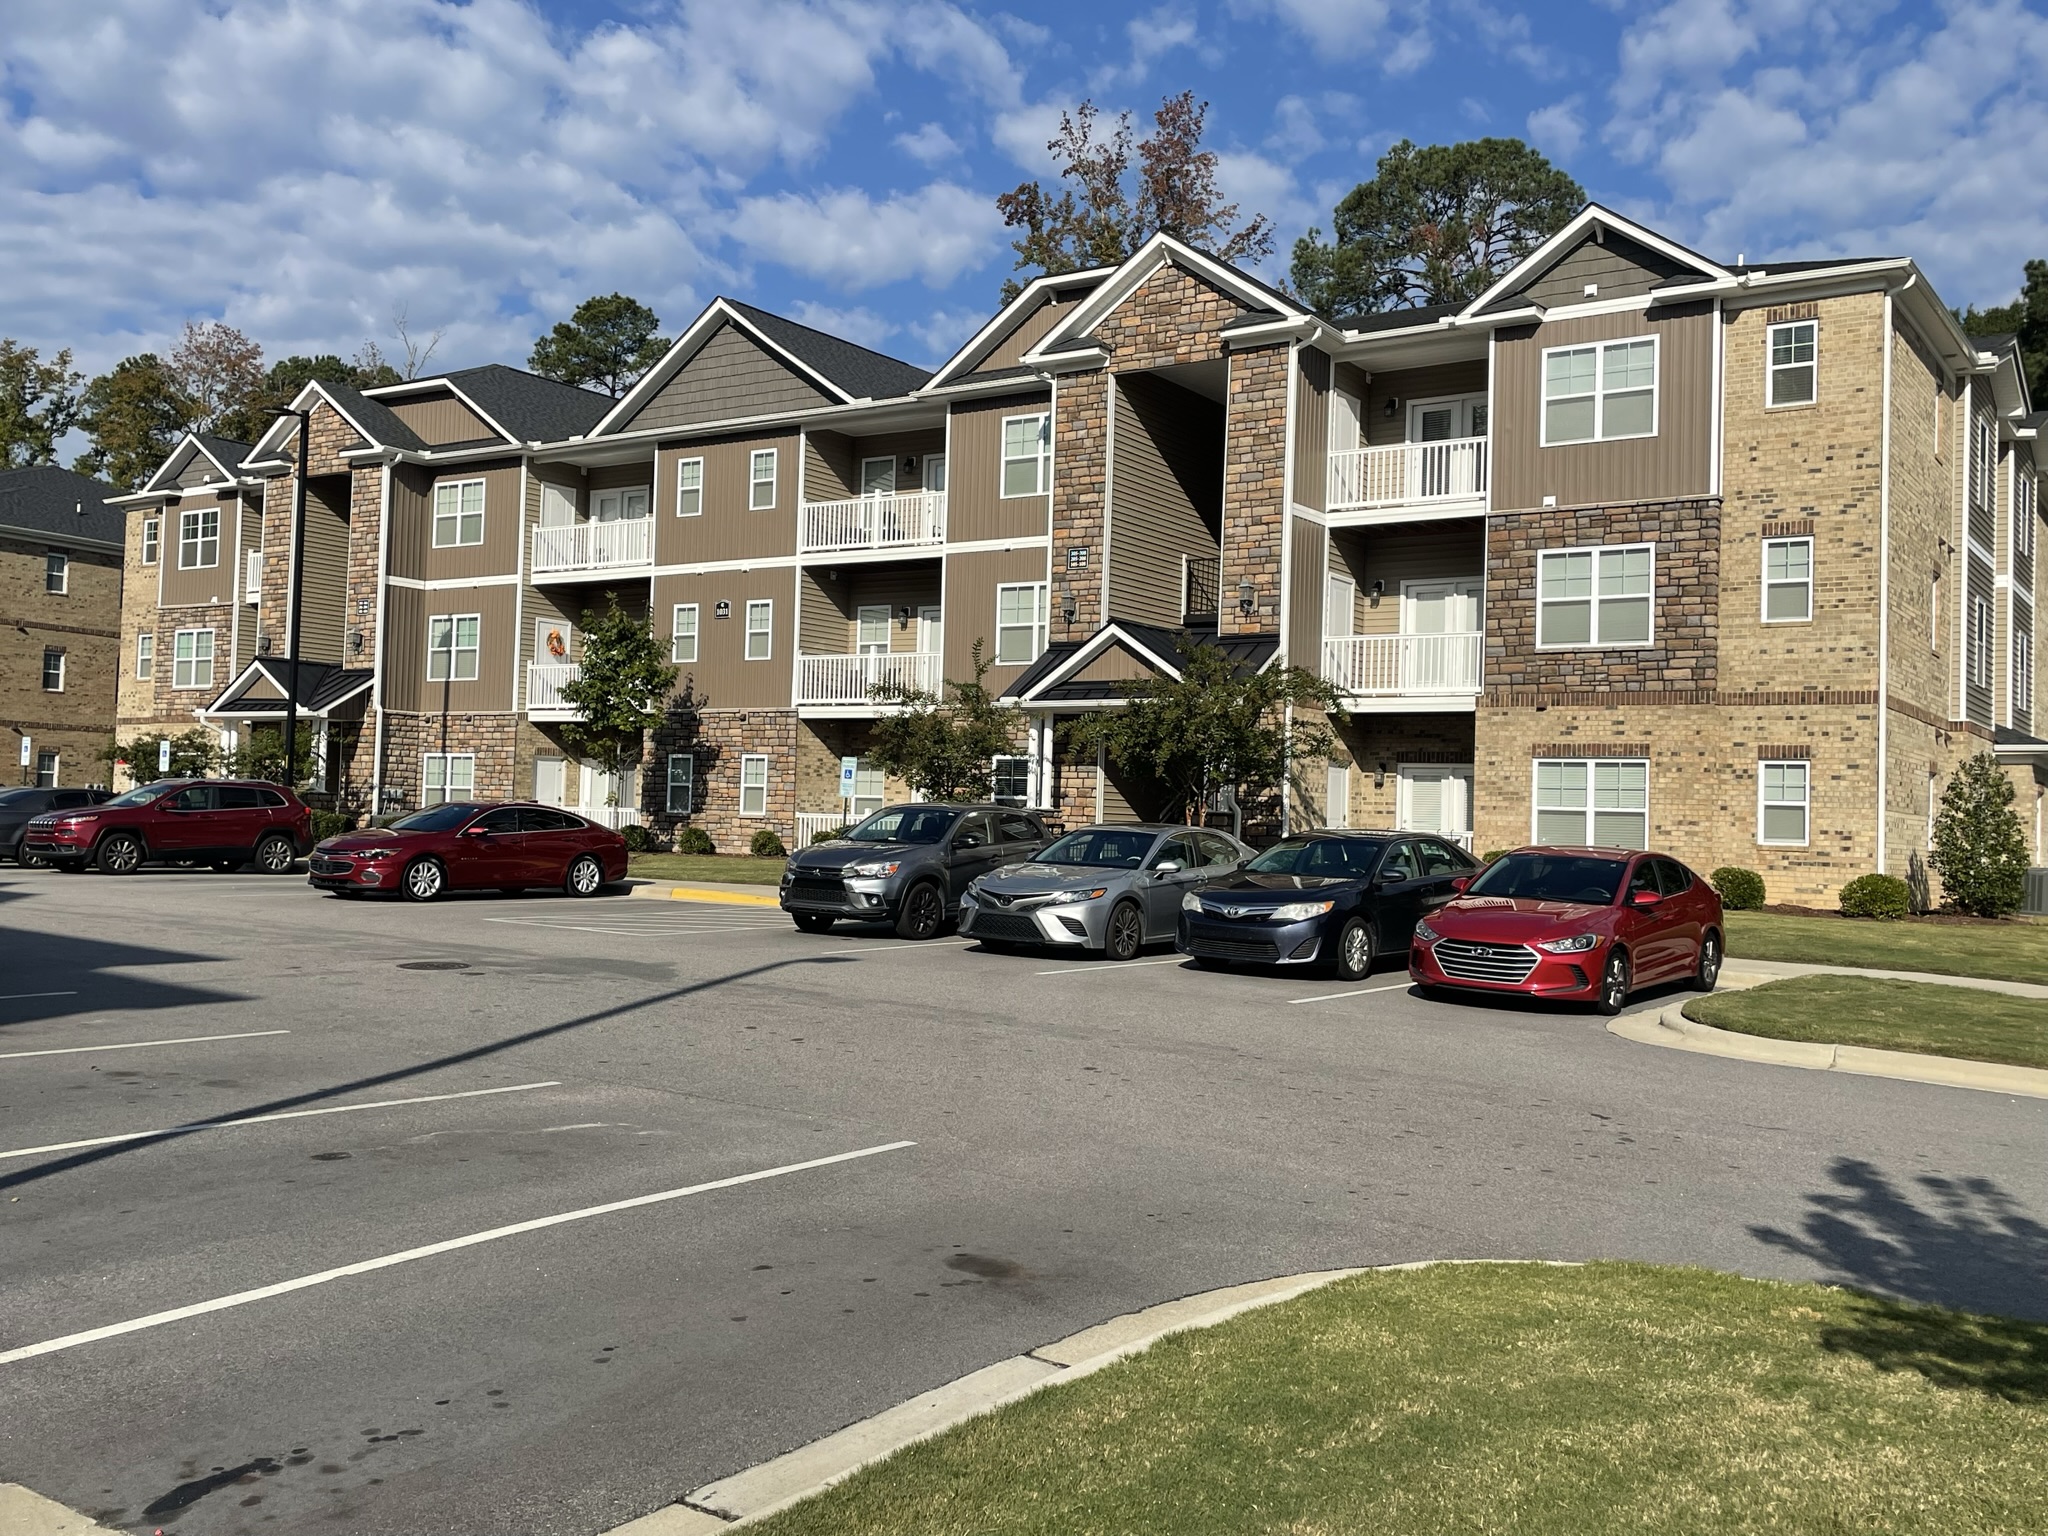 The Best Pressure Washing & Soft Washing in Knightdale, NC: Apartment Complex Pressure Washing in Knightdale, NC